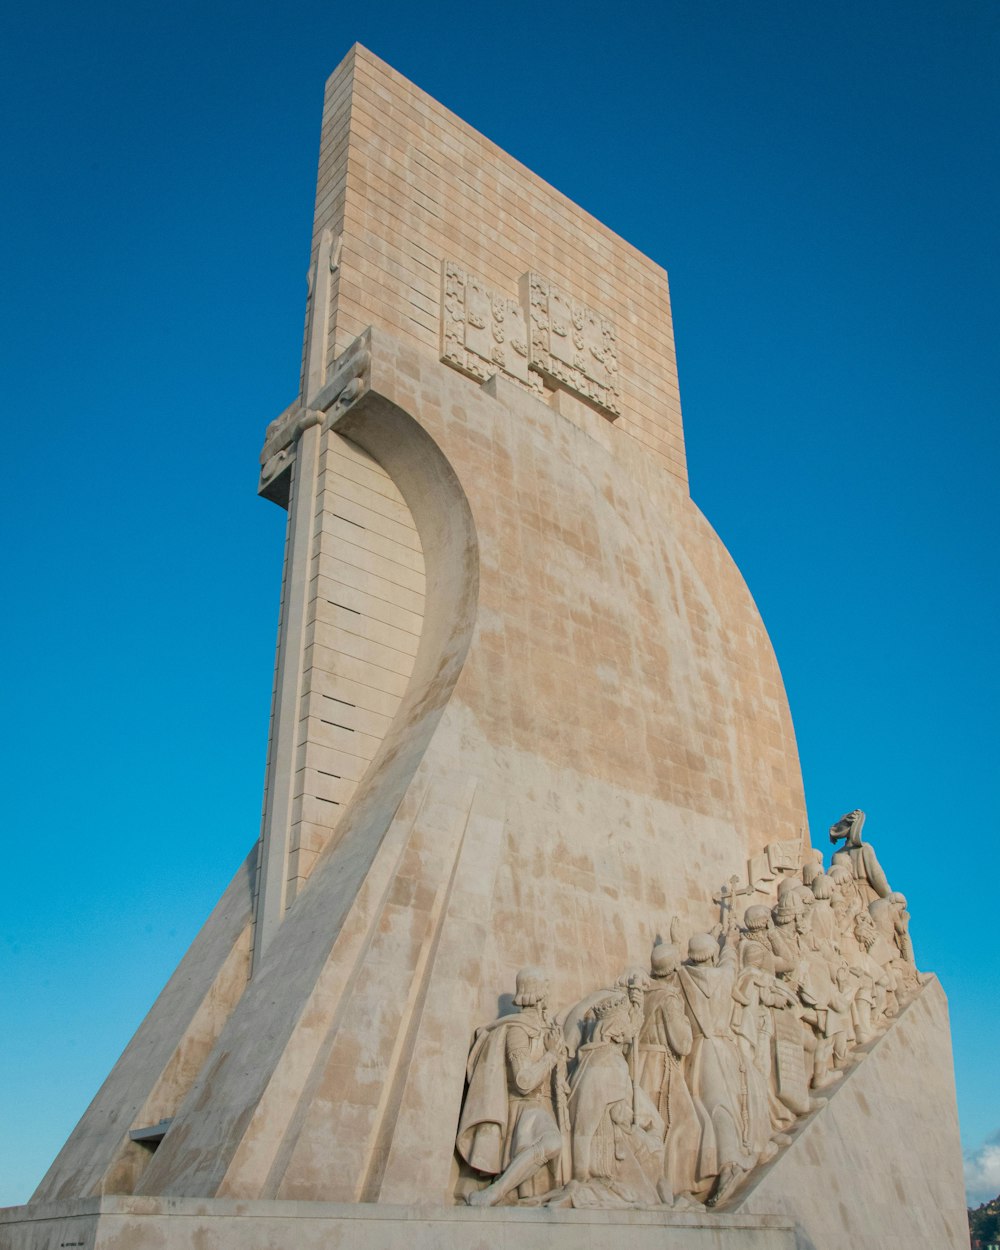 a large monument with statues on the side of it